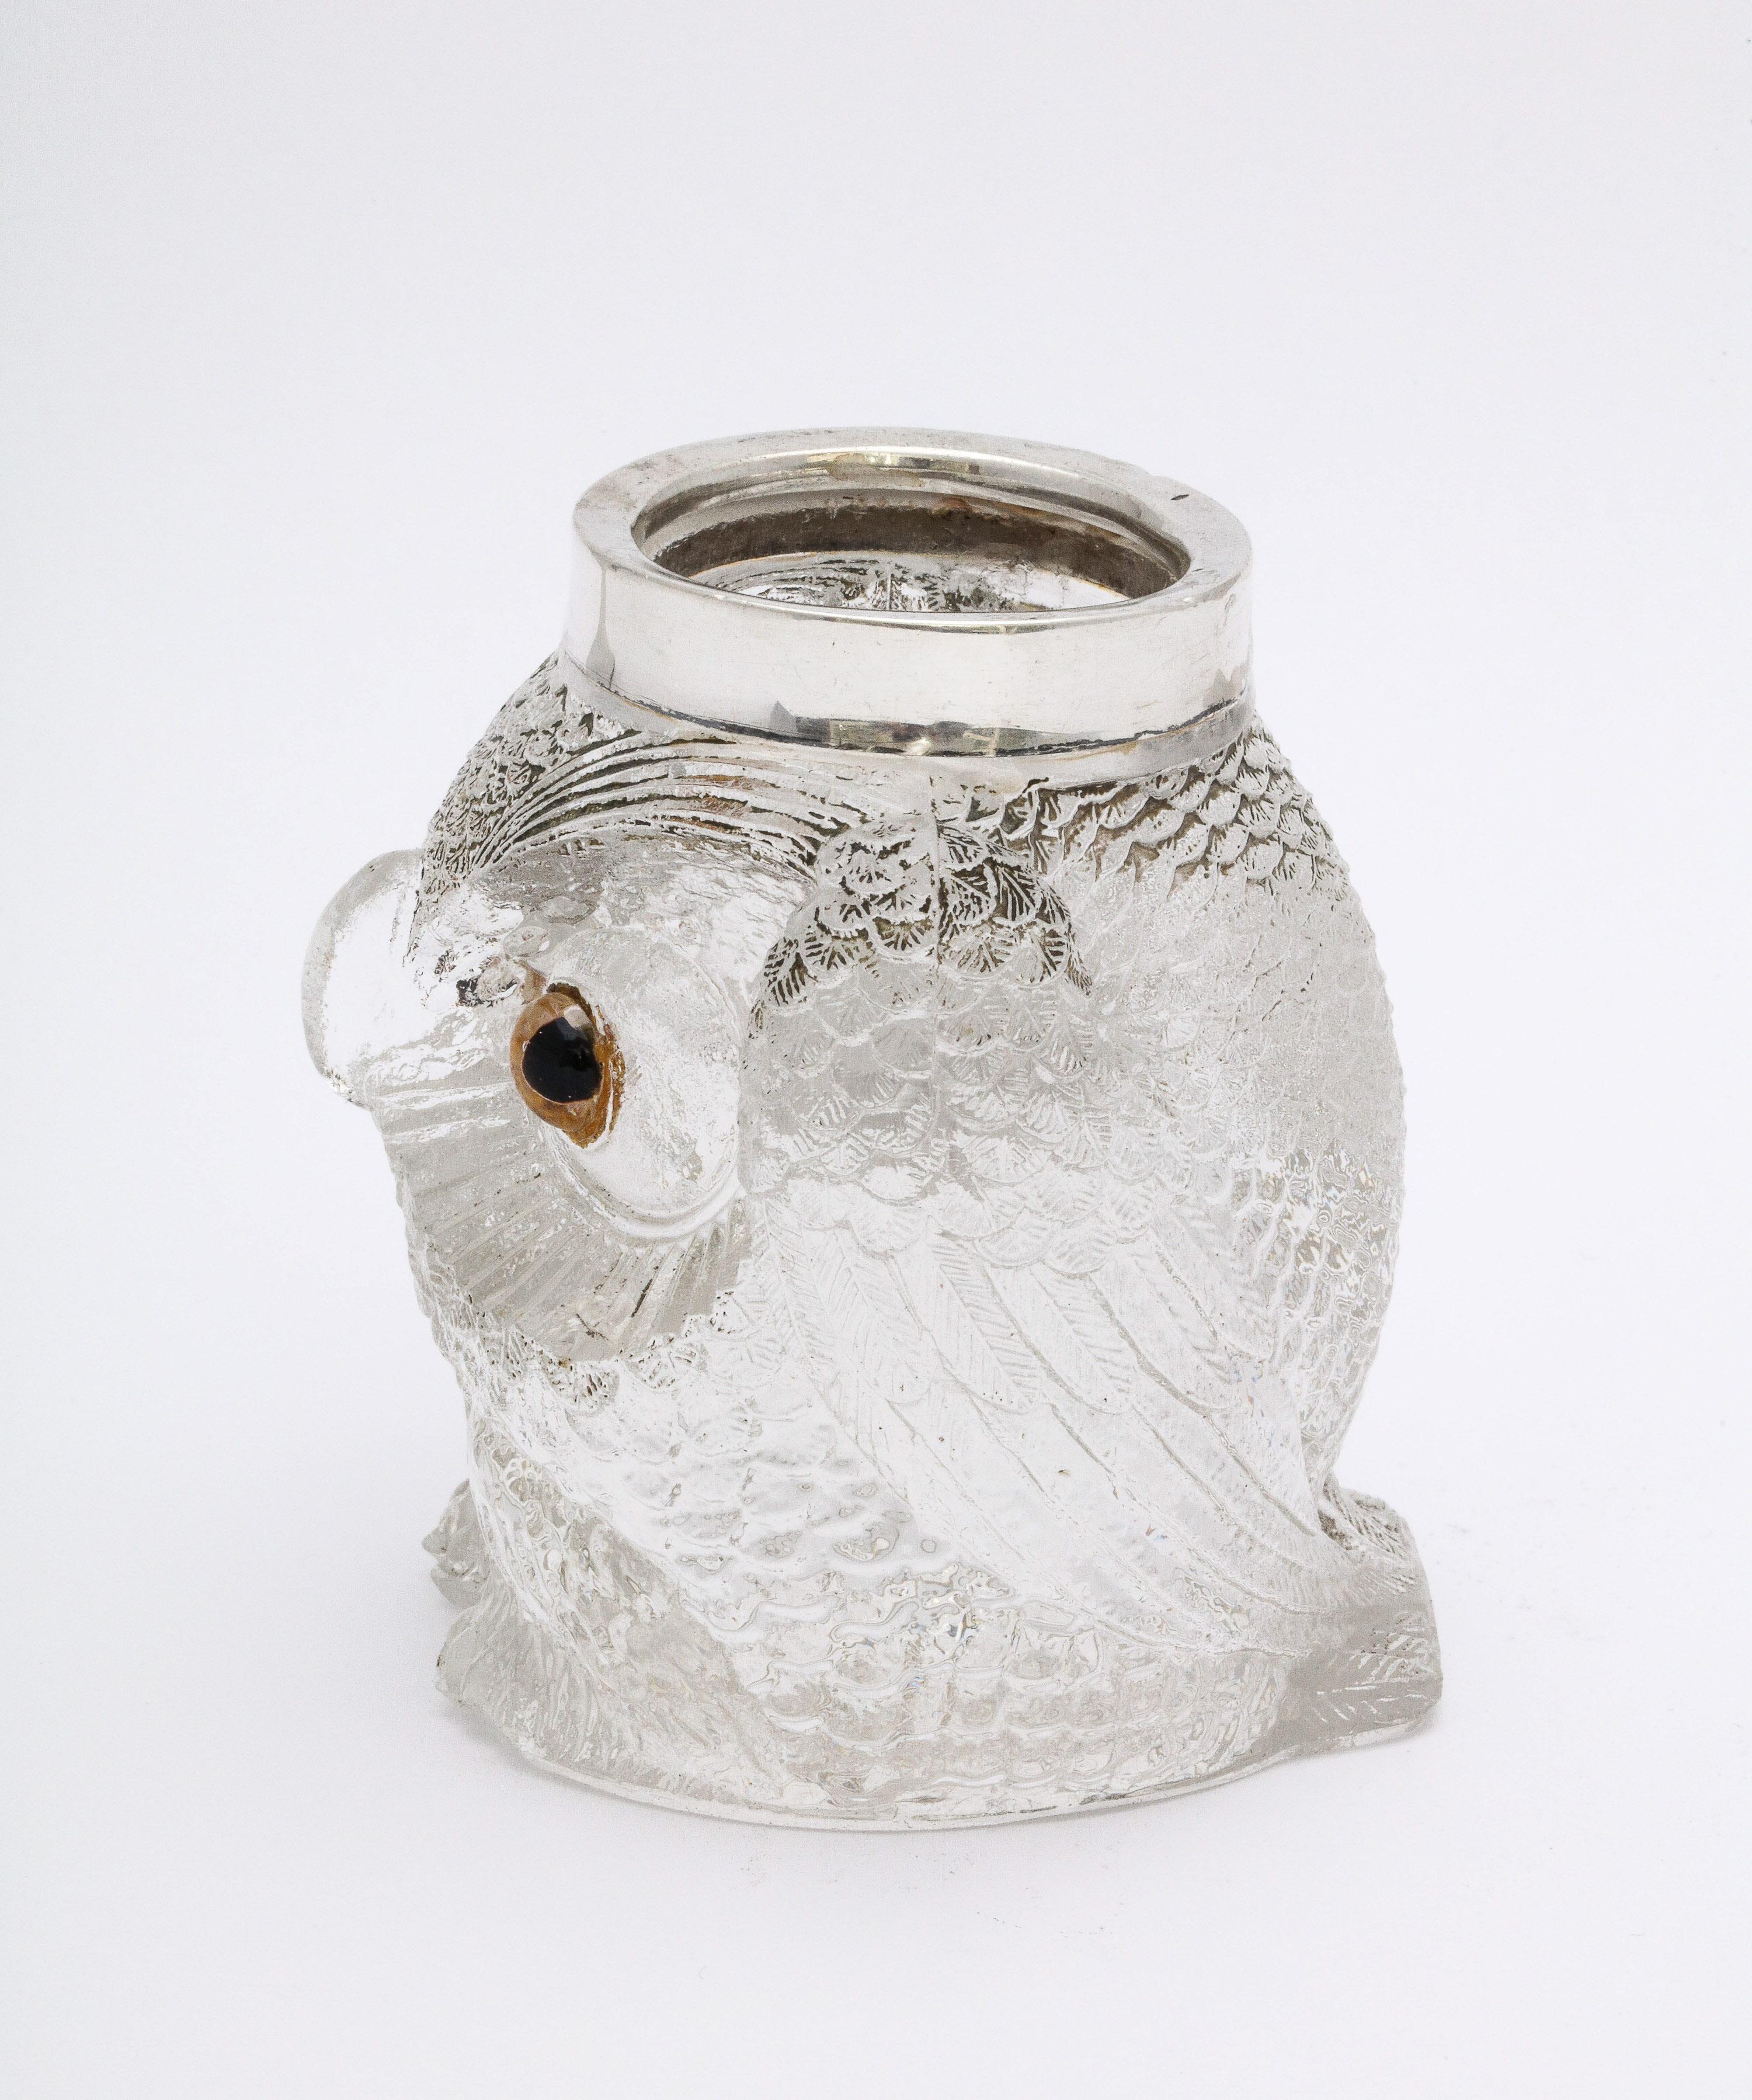 Rare Art Deco Period Sterling Silver-Mounted Glass Owl-Form Match Striker For Sale 5